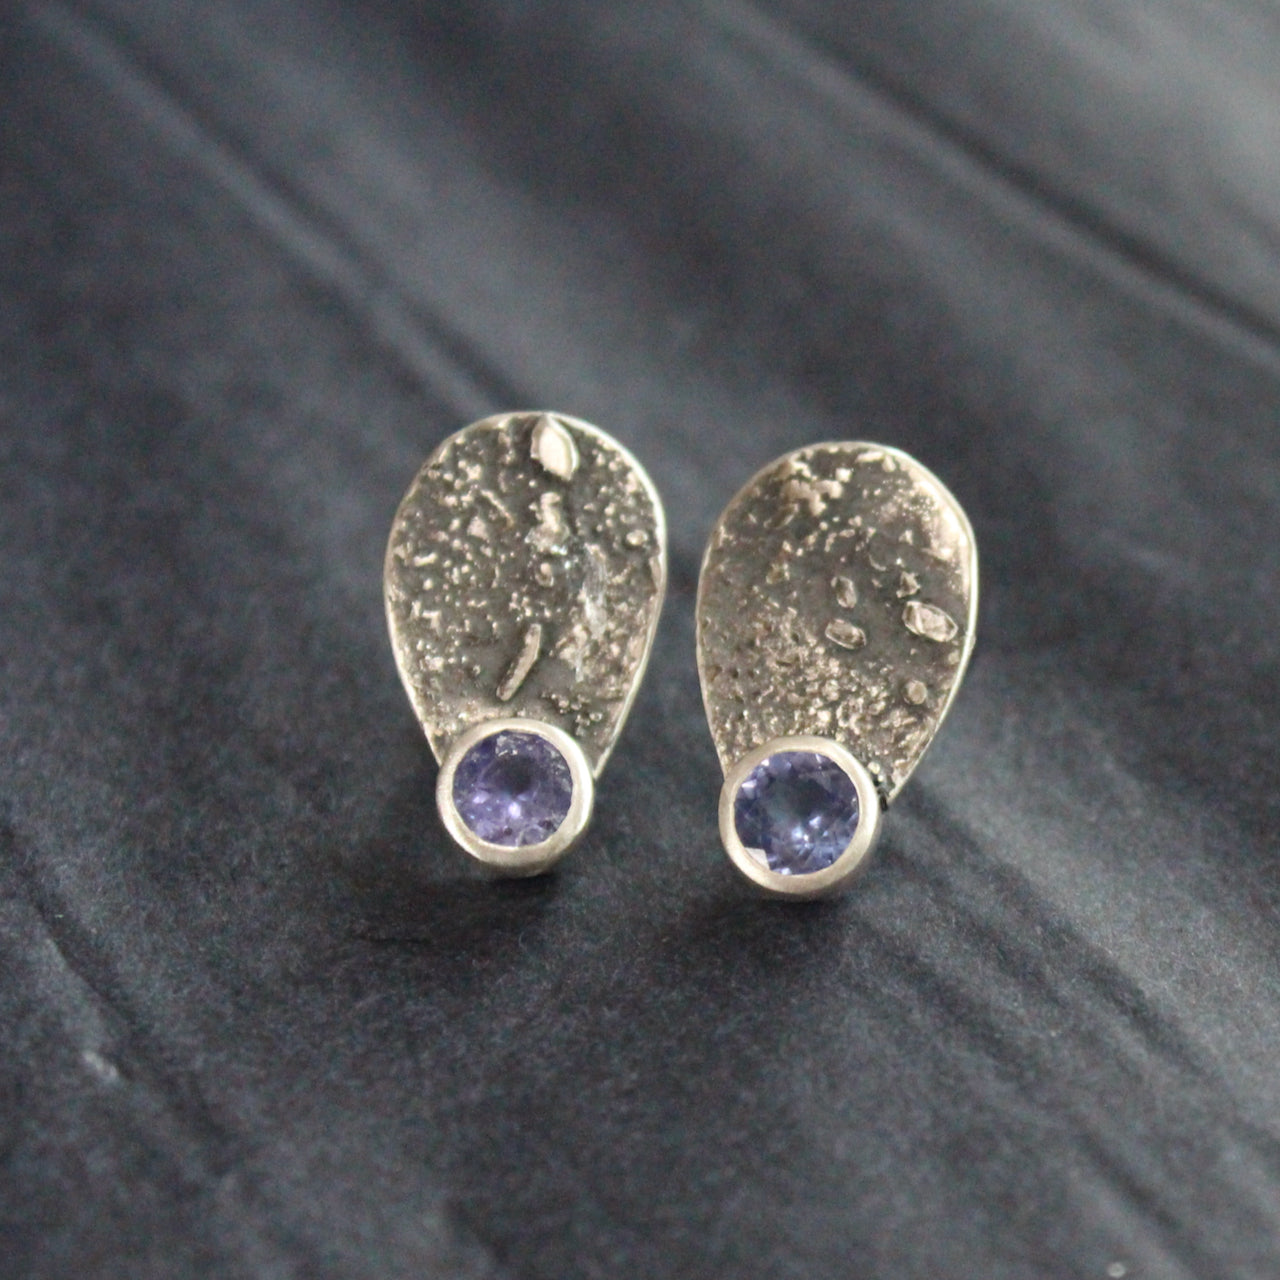 pair of Carin Lindberg textured silver earrings teardrop shape with silver encased small purple stone 